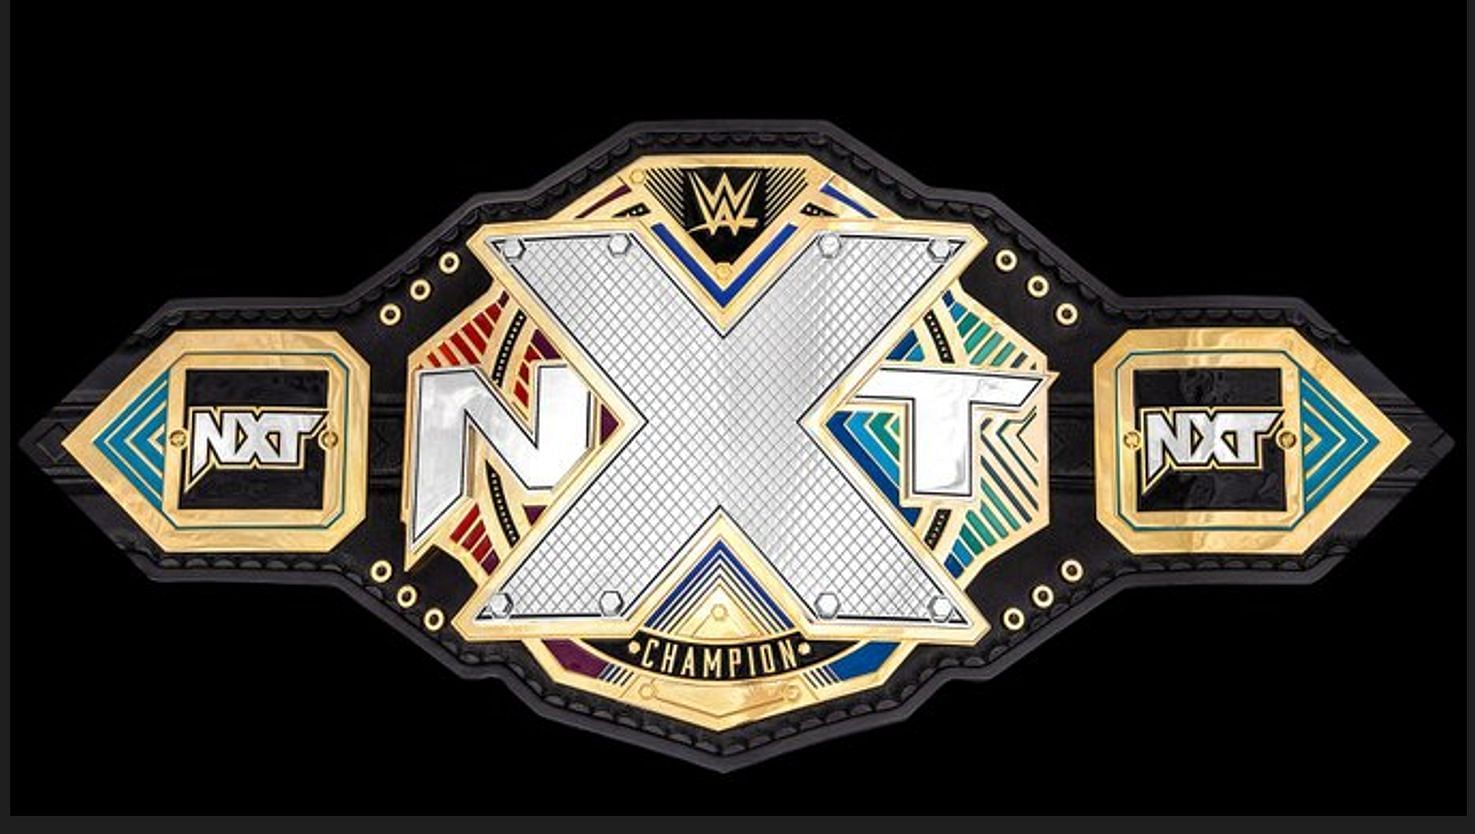 NXT Championship belts rumored to get a major update